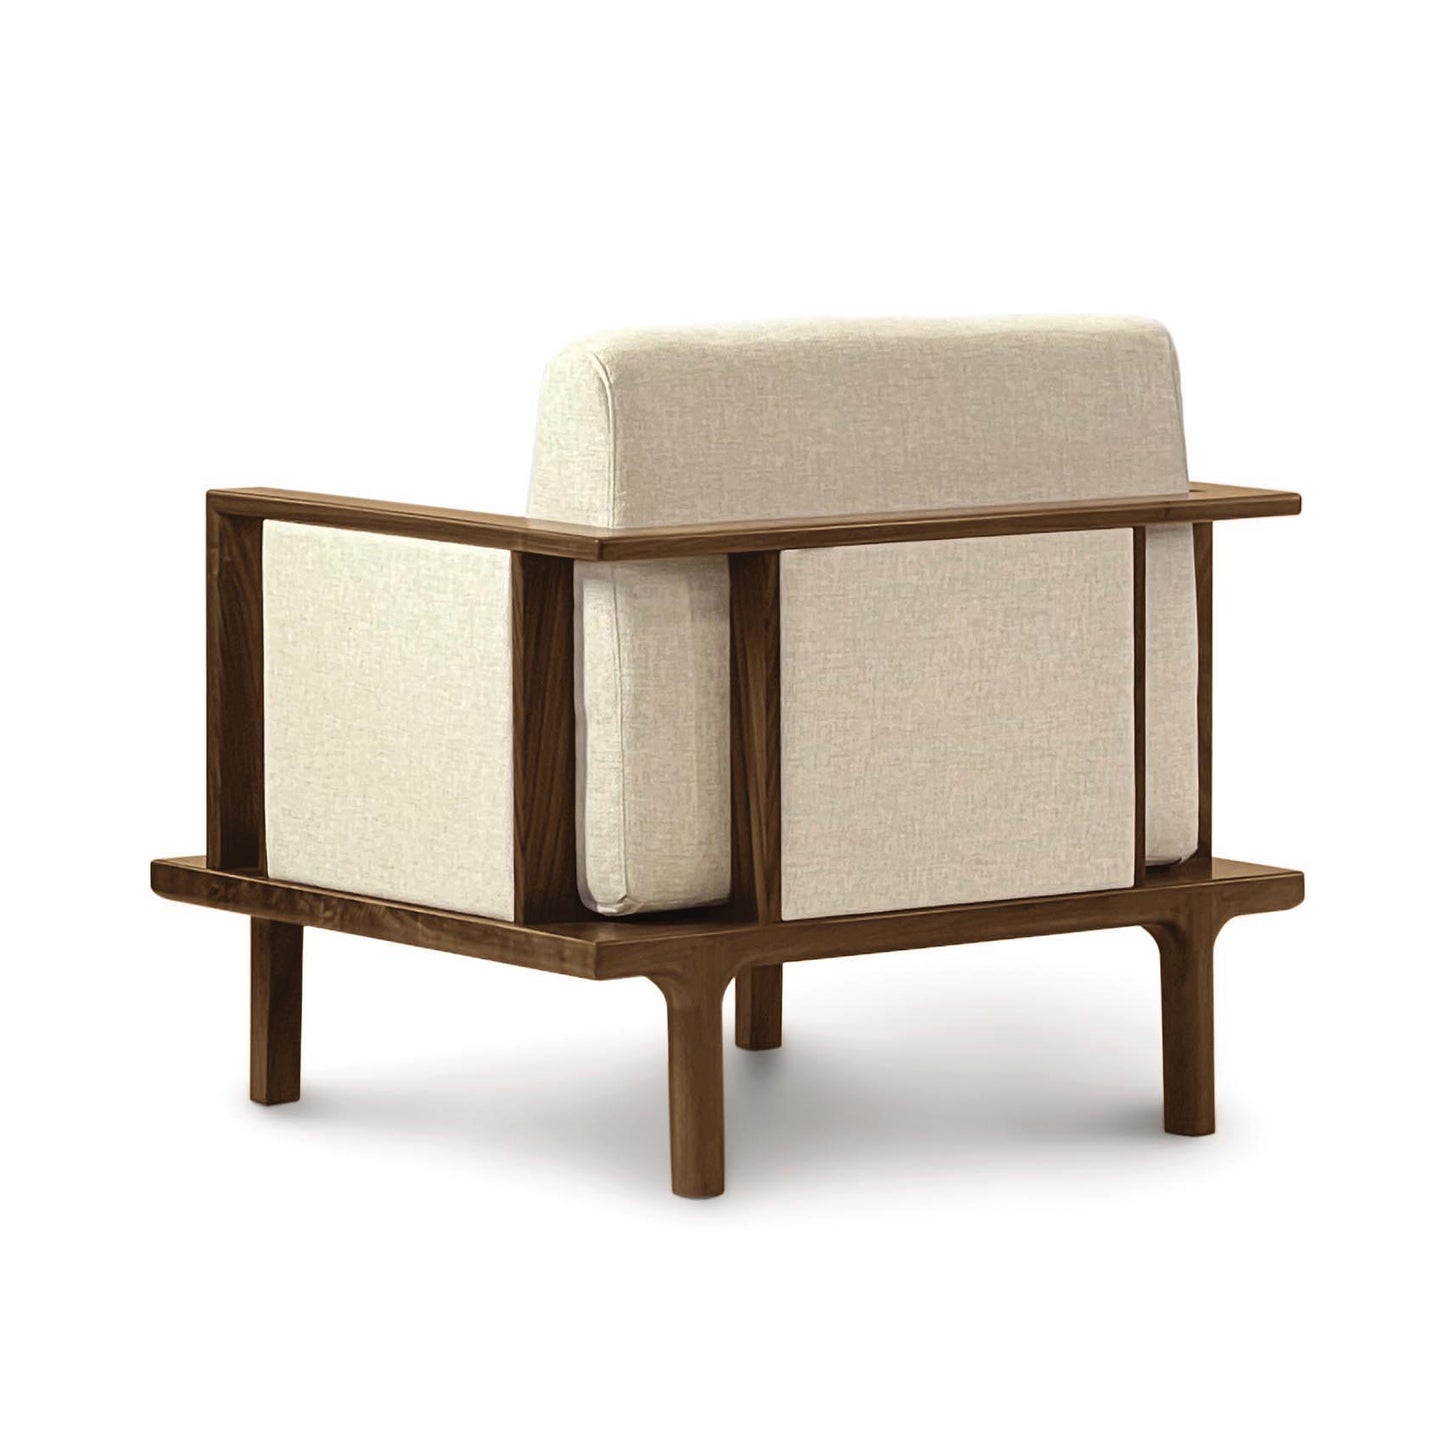 A Sierra Walnut Upholstered Chair with Upholstered Panels by Copeland Furniture, with wooden frame and custom upholstery option, isolated on a white background.